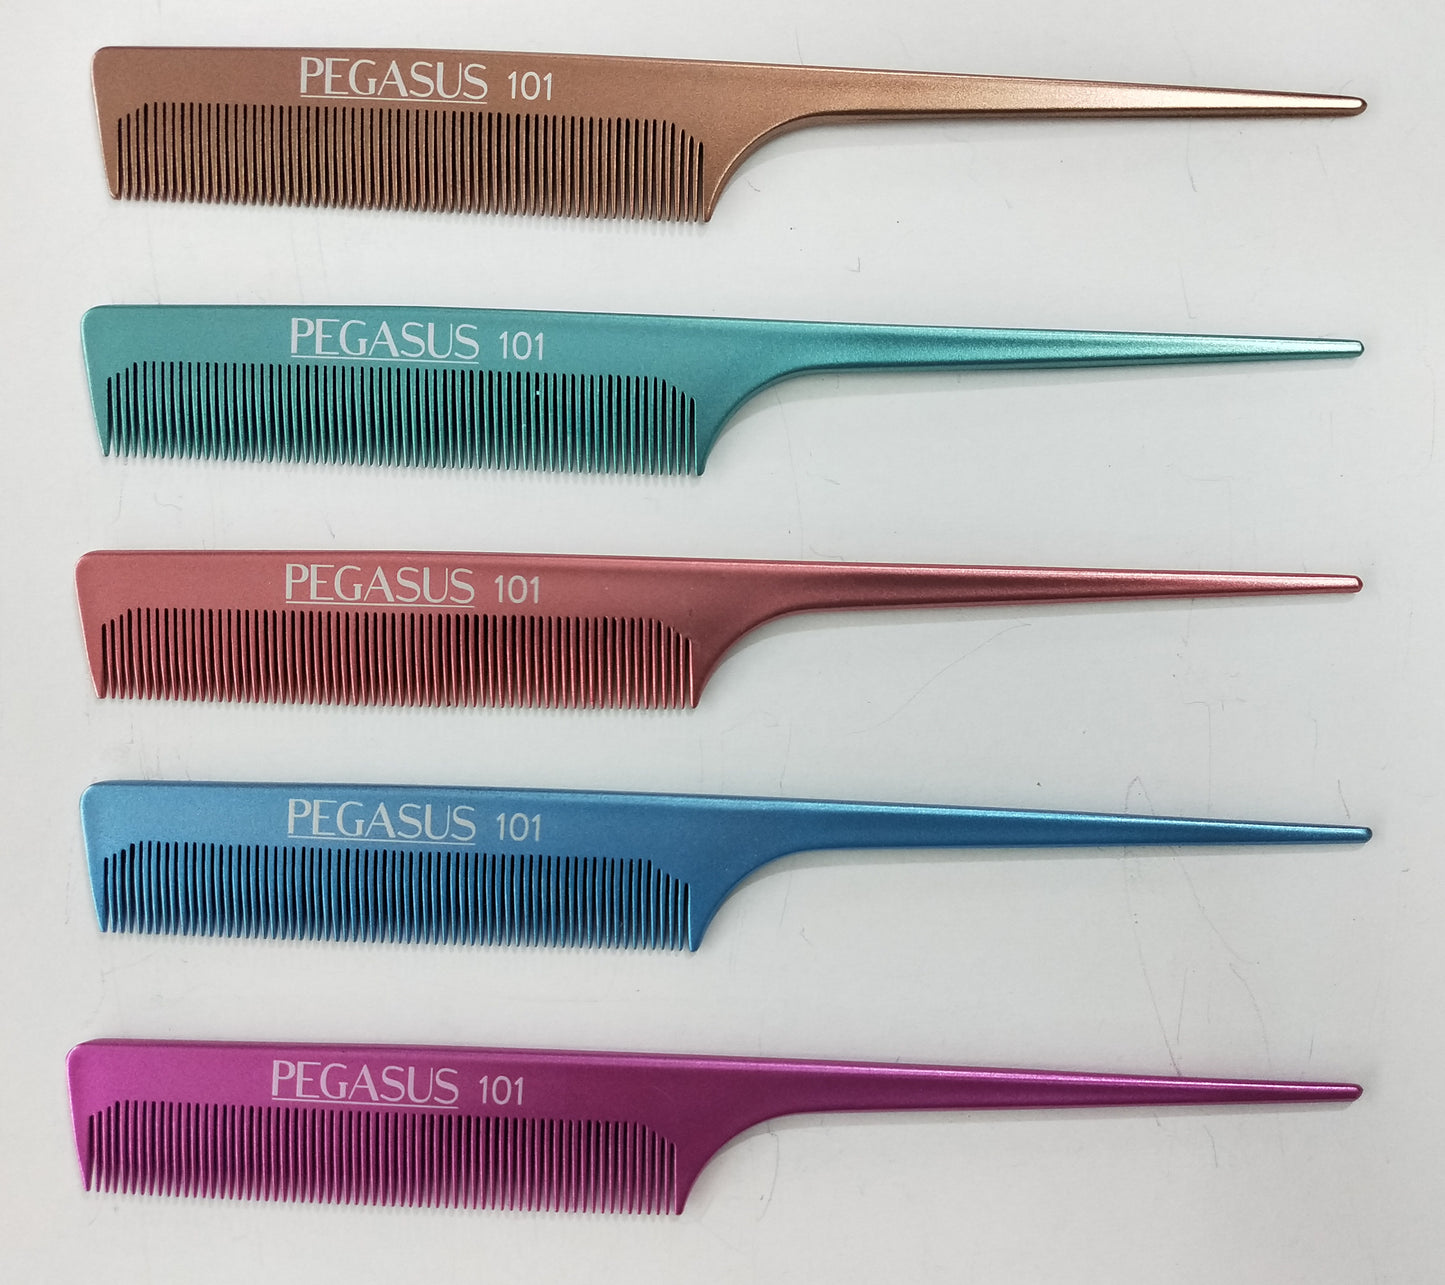 Pegasus MICOLOR 101, 8in Hard Rubber Fine Tooth Rat Tail Comb, Handmade, Seamless, Smooth Edges, Anti Static, Heat and Chemically Resistant, Great for Parting, Coloring Hair | Peines de goma dura - Copper